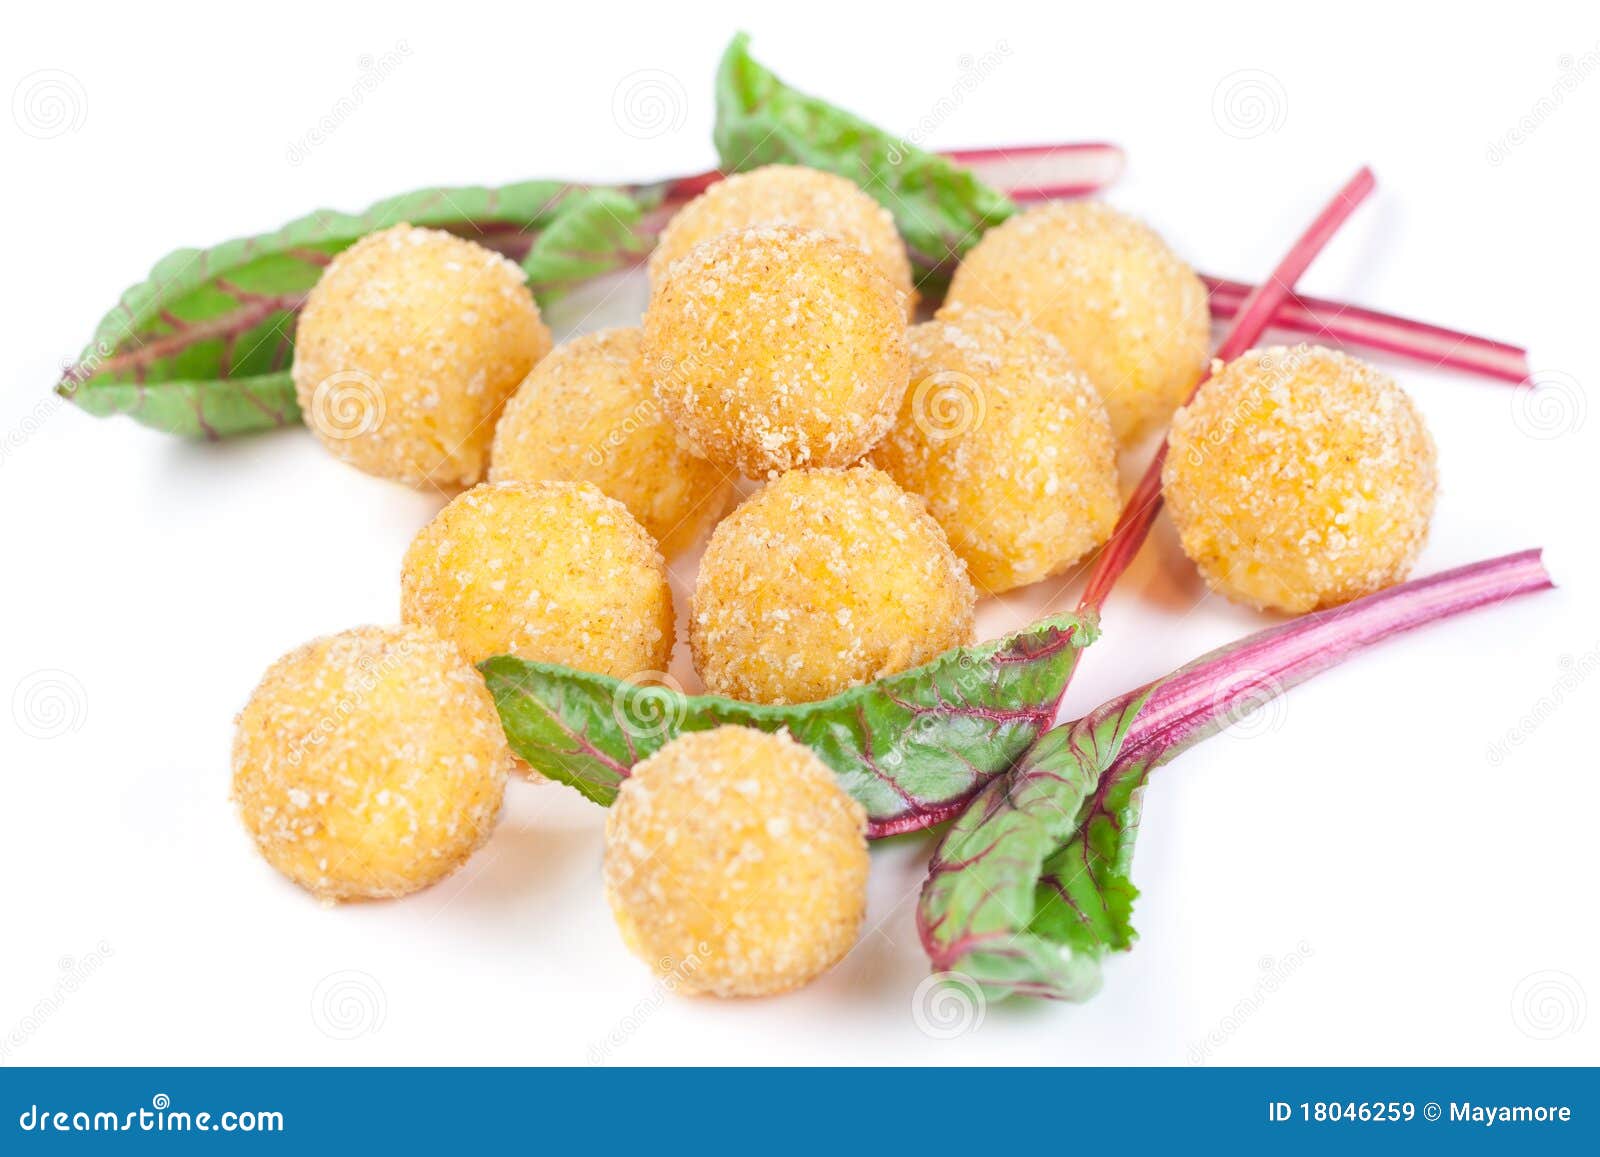 Two Potato Balls Are Partially Eaten With Cheese In The Middle Background,  Croquette On White Background, Hd Photography Photo Background Image And  Wallpaper for Free Download